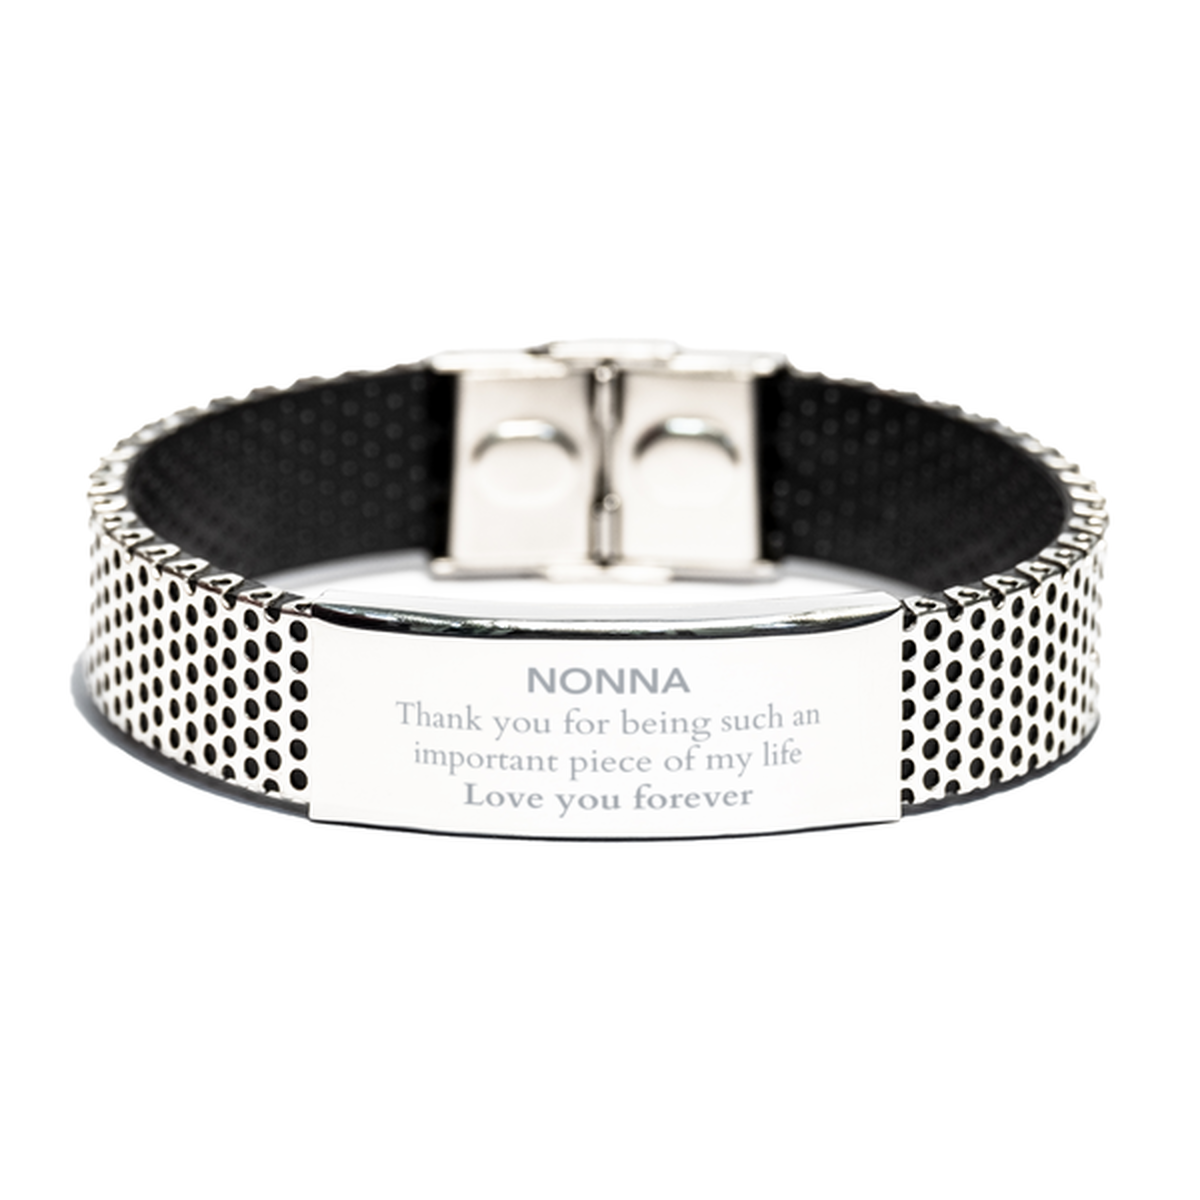 Appropriate Nonna Stainless Steel Bracelet Epic Birthday Gifts for Nonna Thank you for being such an important piece of my life Nonna Christmas Mothers Fathers Day